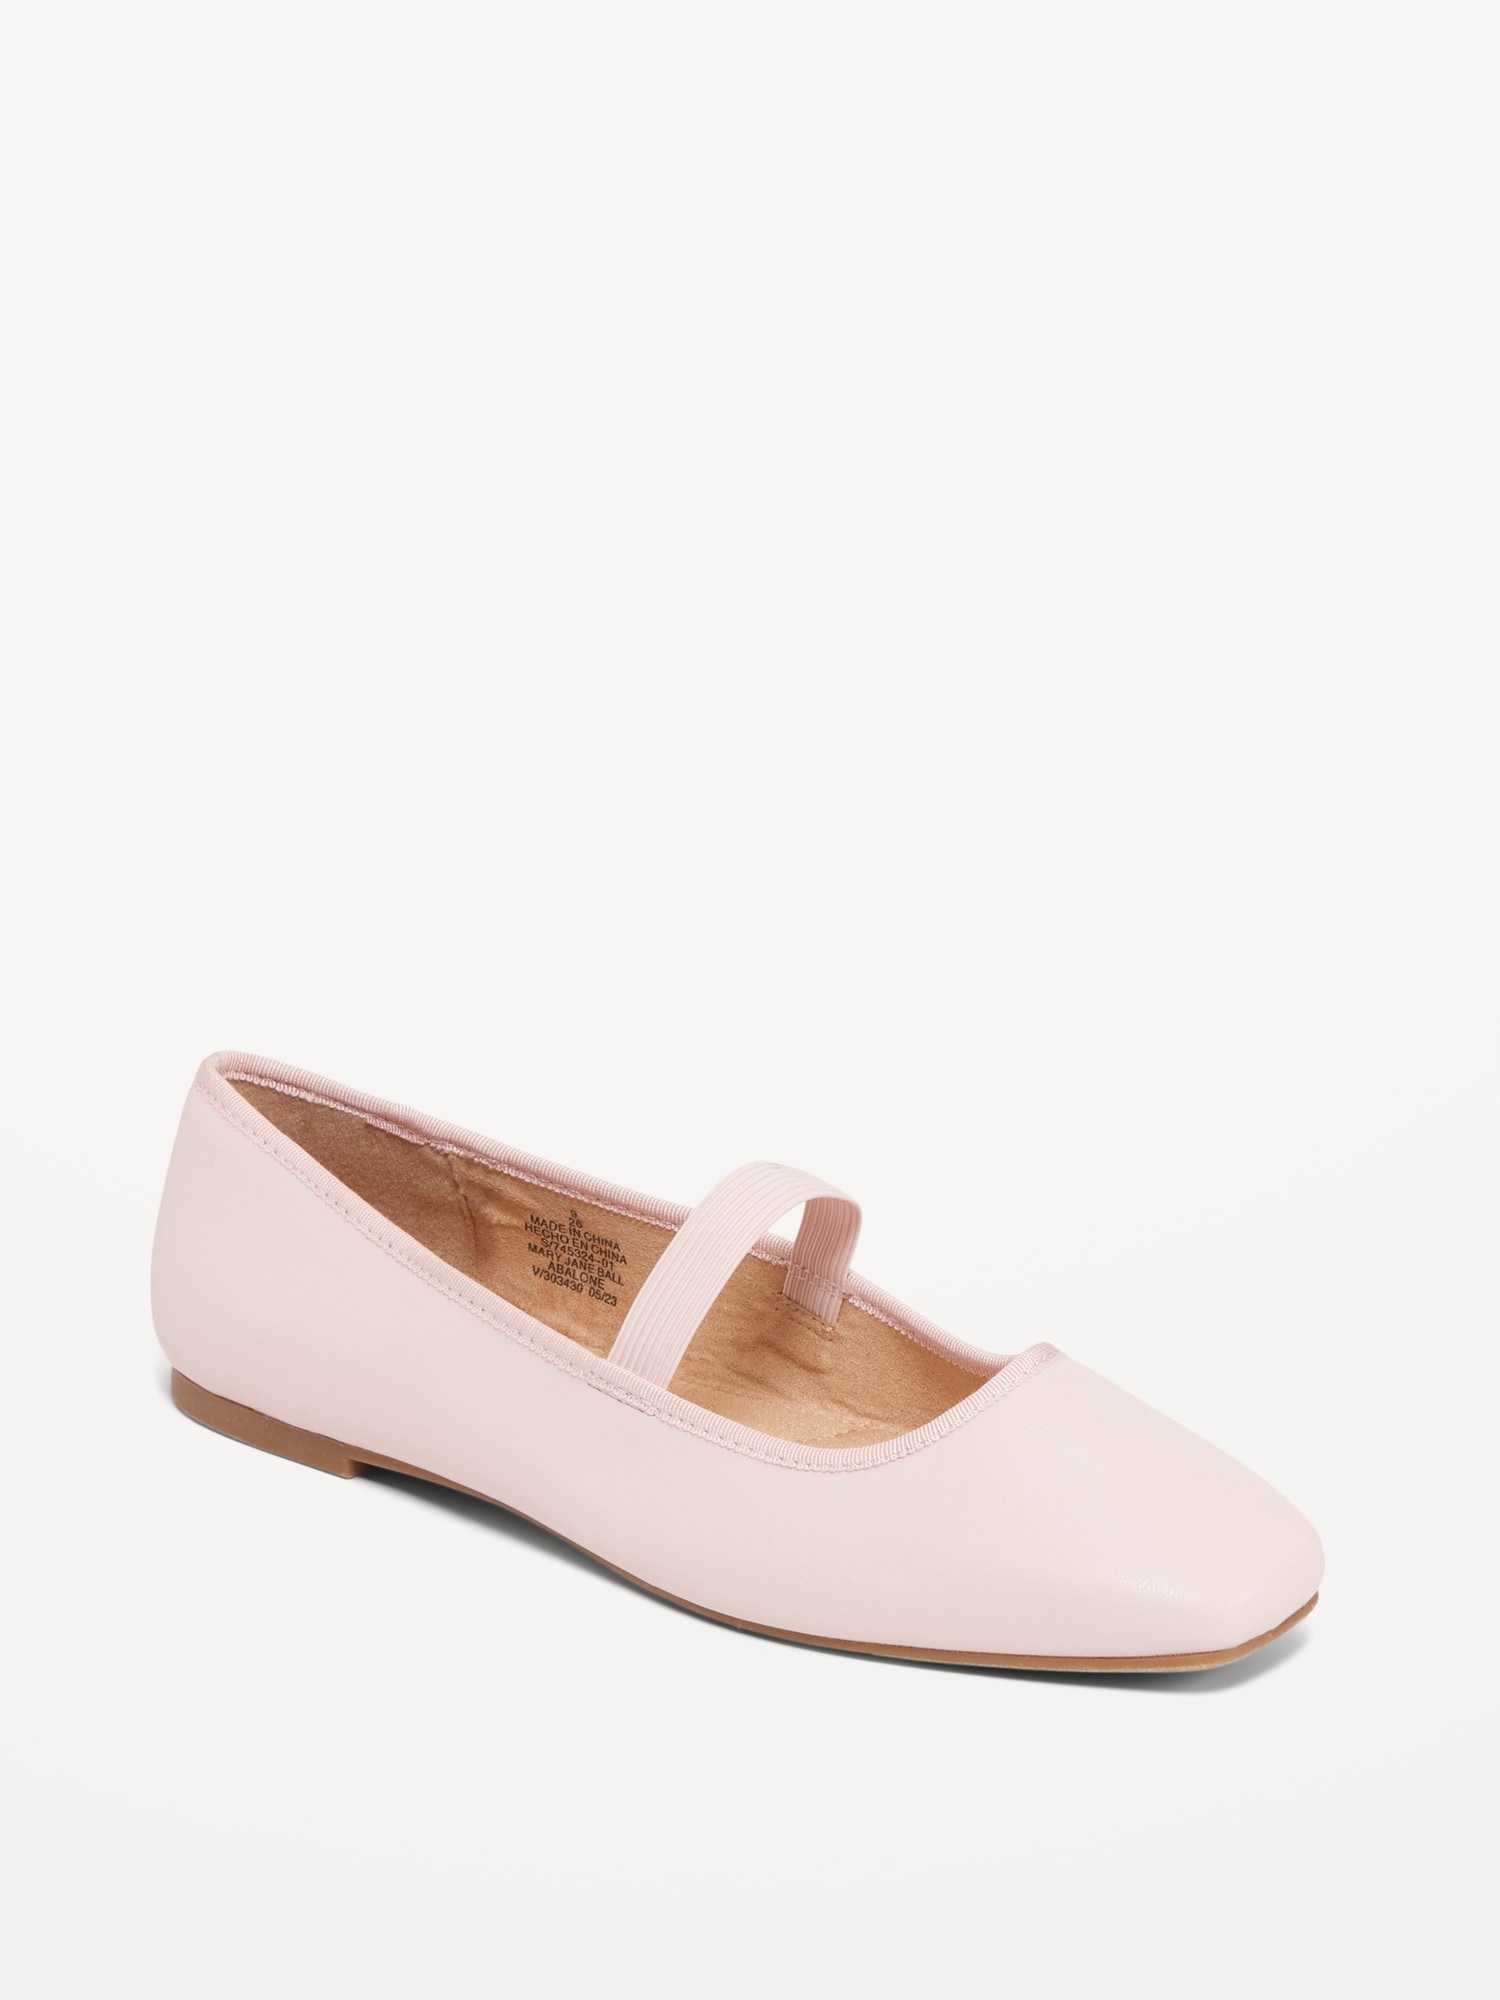 Mary Jane Square-Toe Ballet Flats for Women | Old Navy